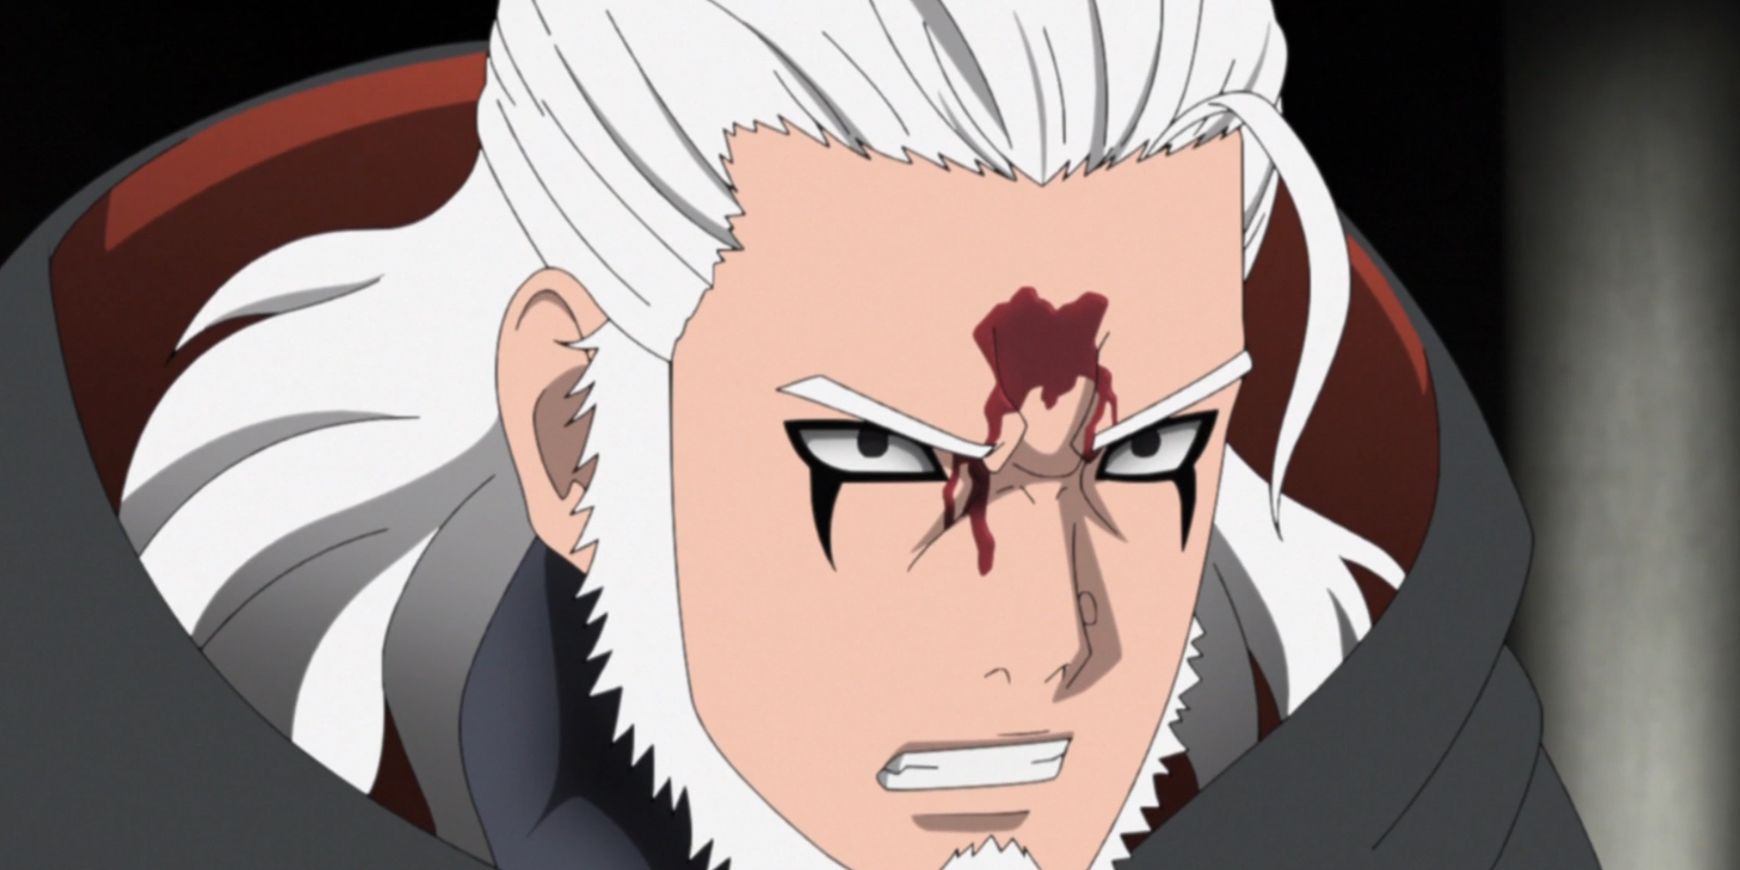 Koji has blood on his forehead and is not doomed in Boruto episode